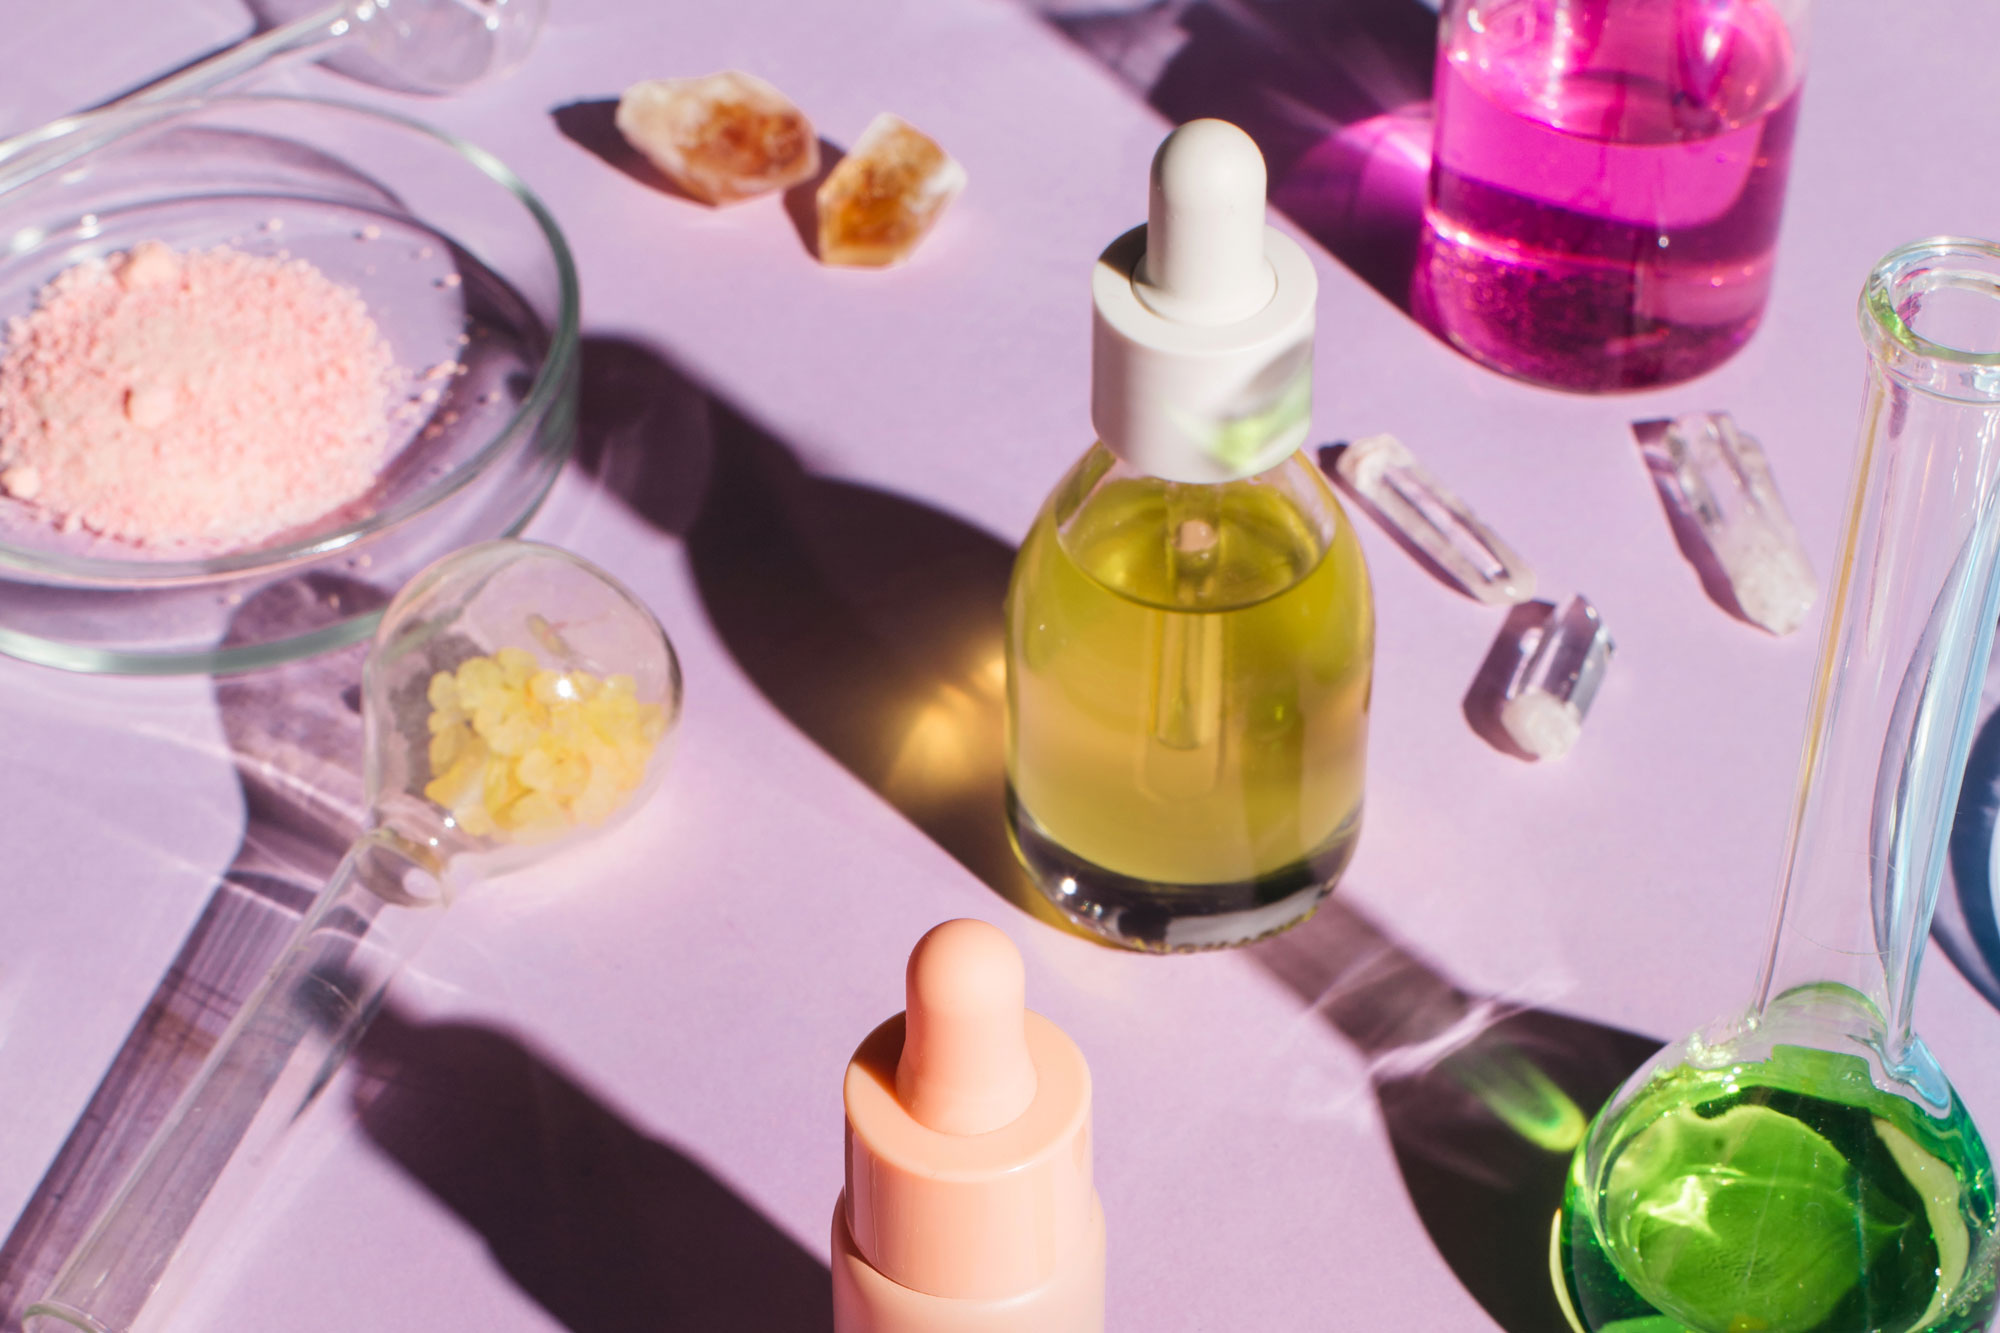 Colorful background with laboratory utensils, samples of cosmetics and glass vials on a purple background